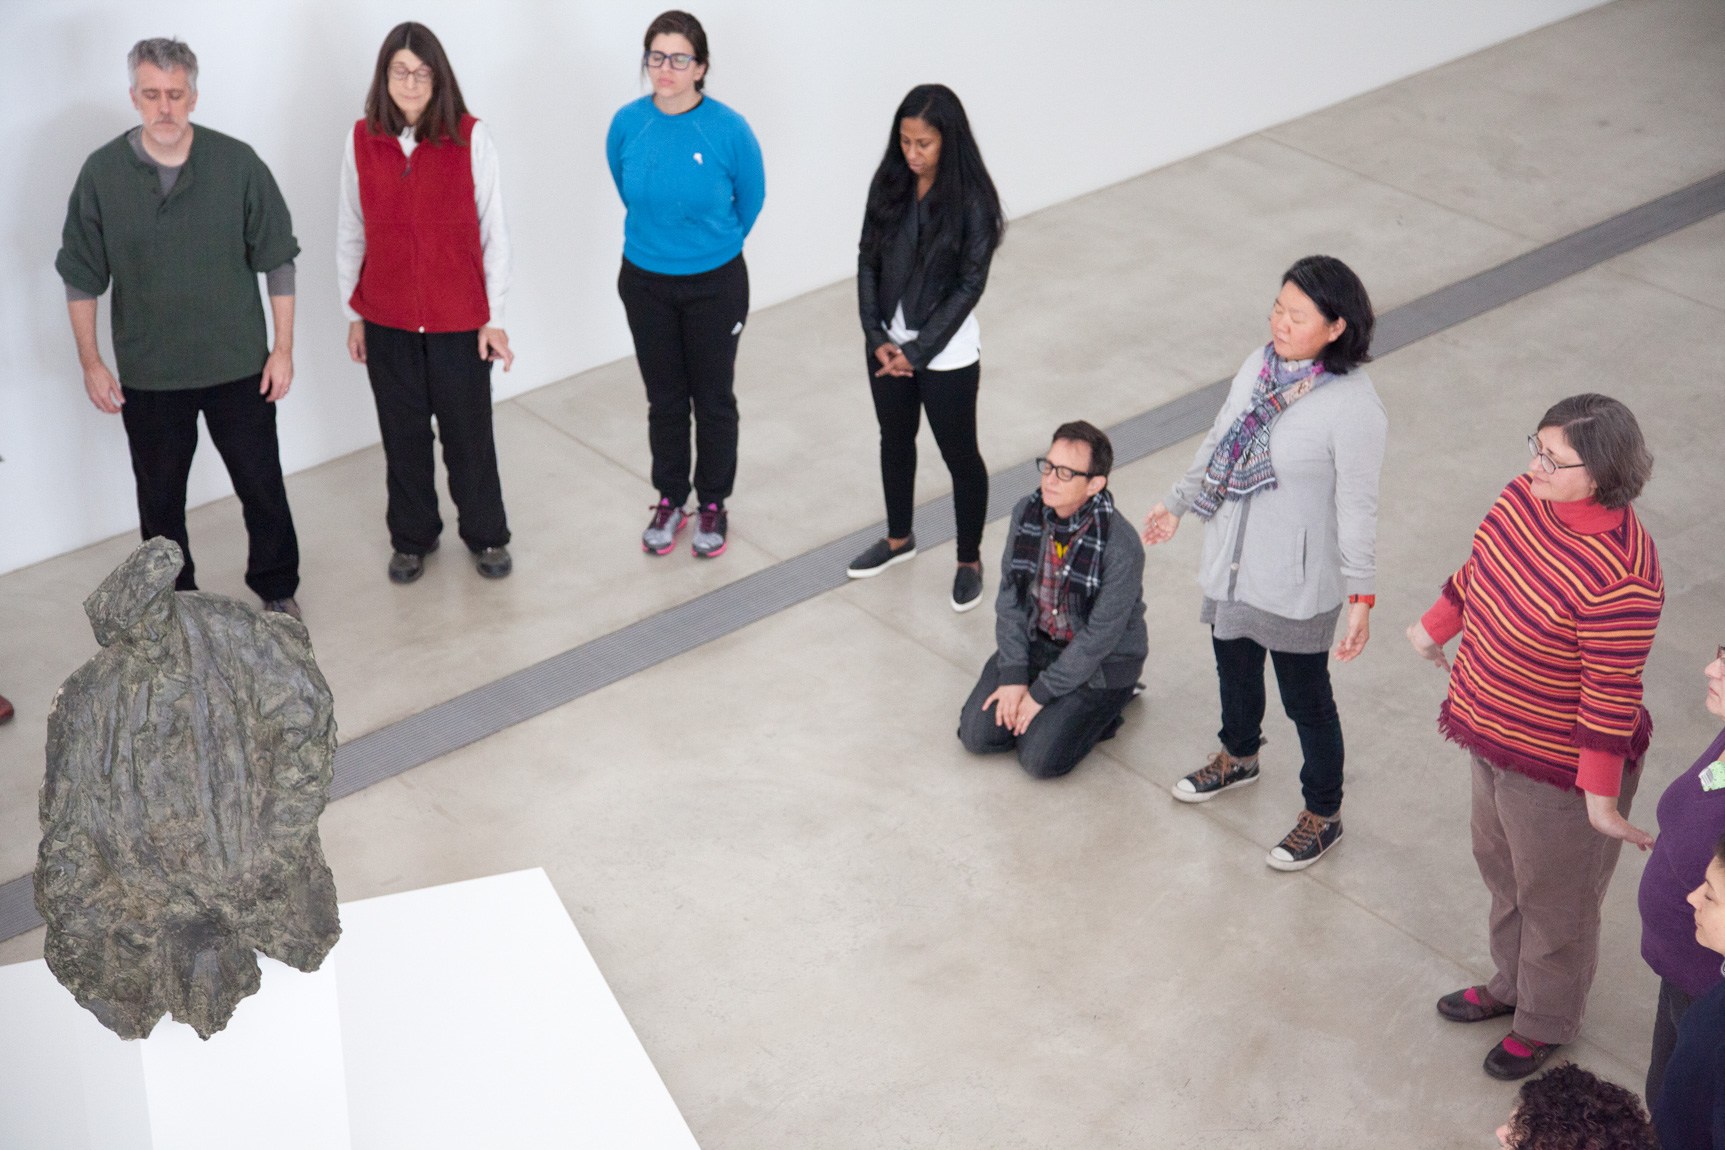 Haruko Tanaka and Asher Hartman lead an exercise workshop with attendants in the Main Gallery, standing and kneeling around Rosso's sculpture of Henri Rouart.